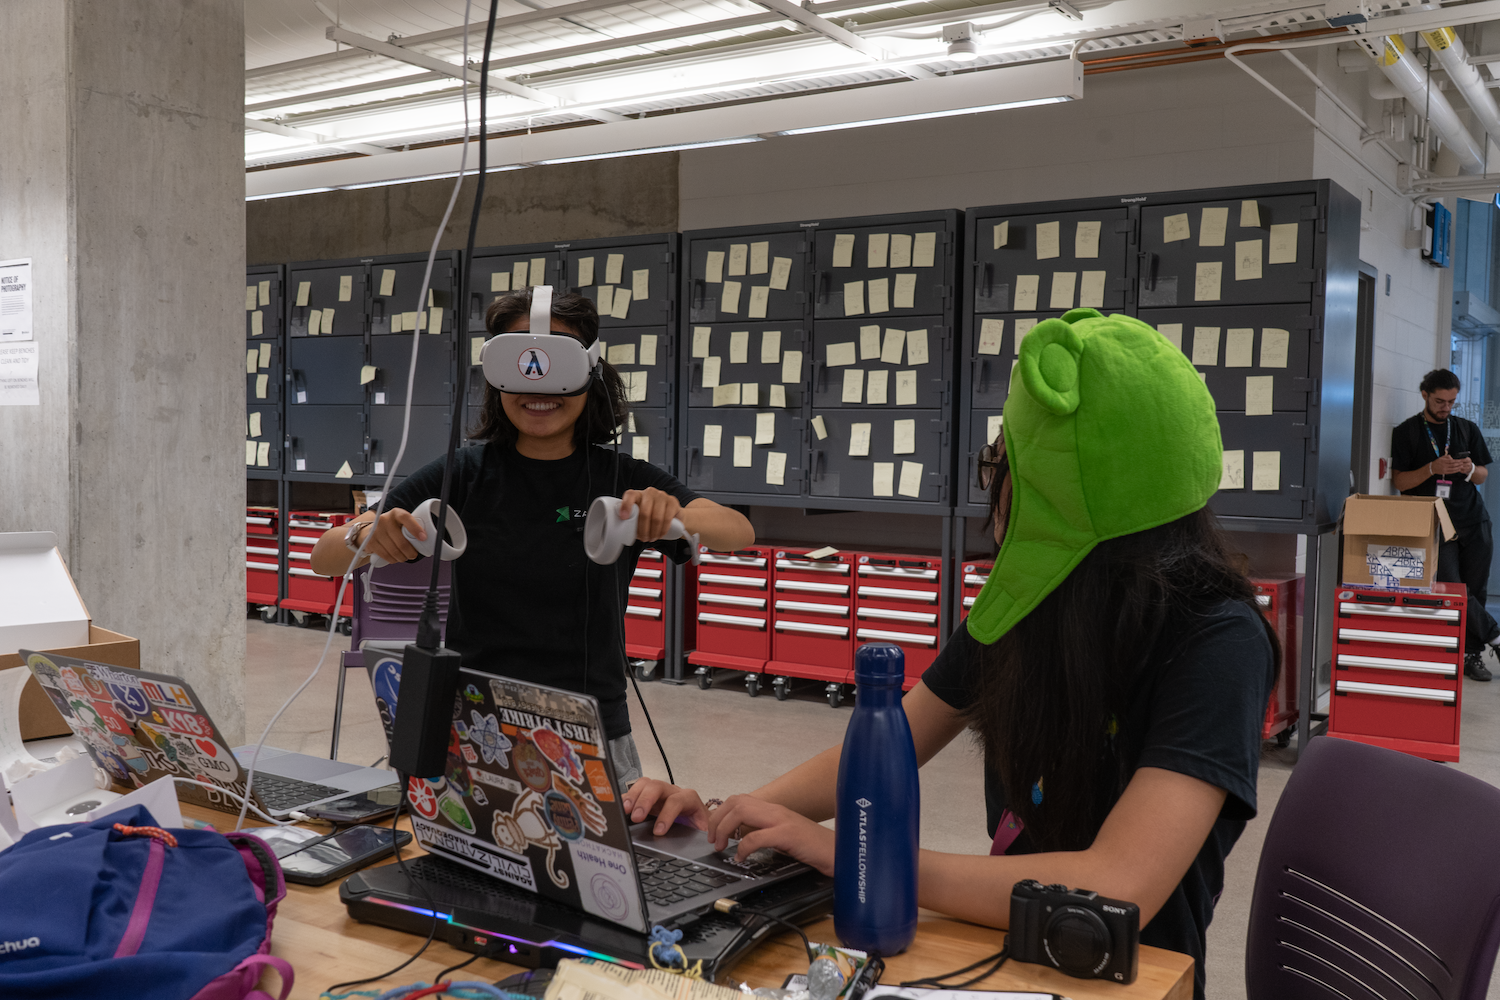 Two students experiment with VR technology